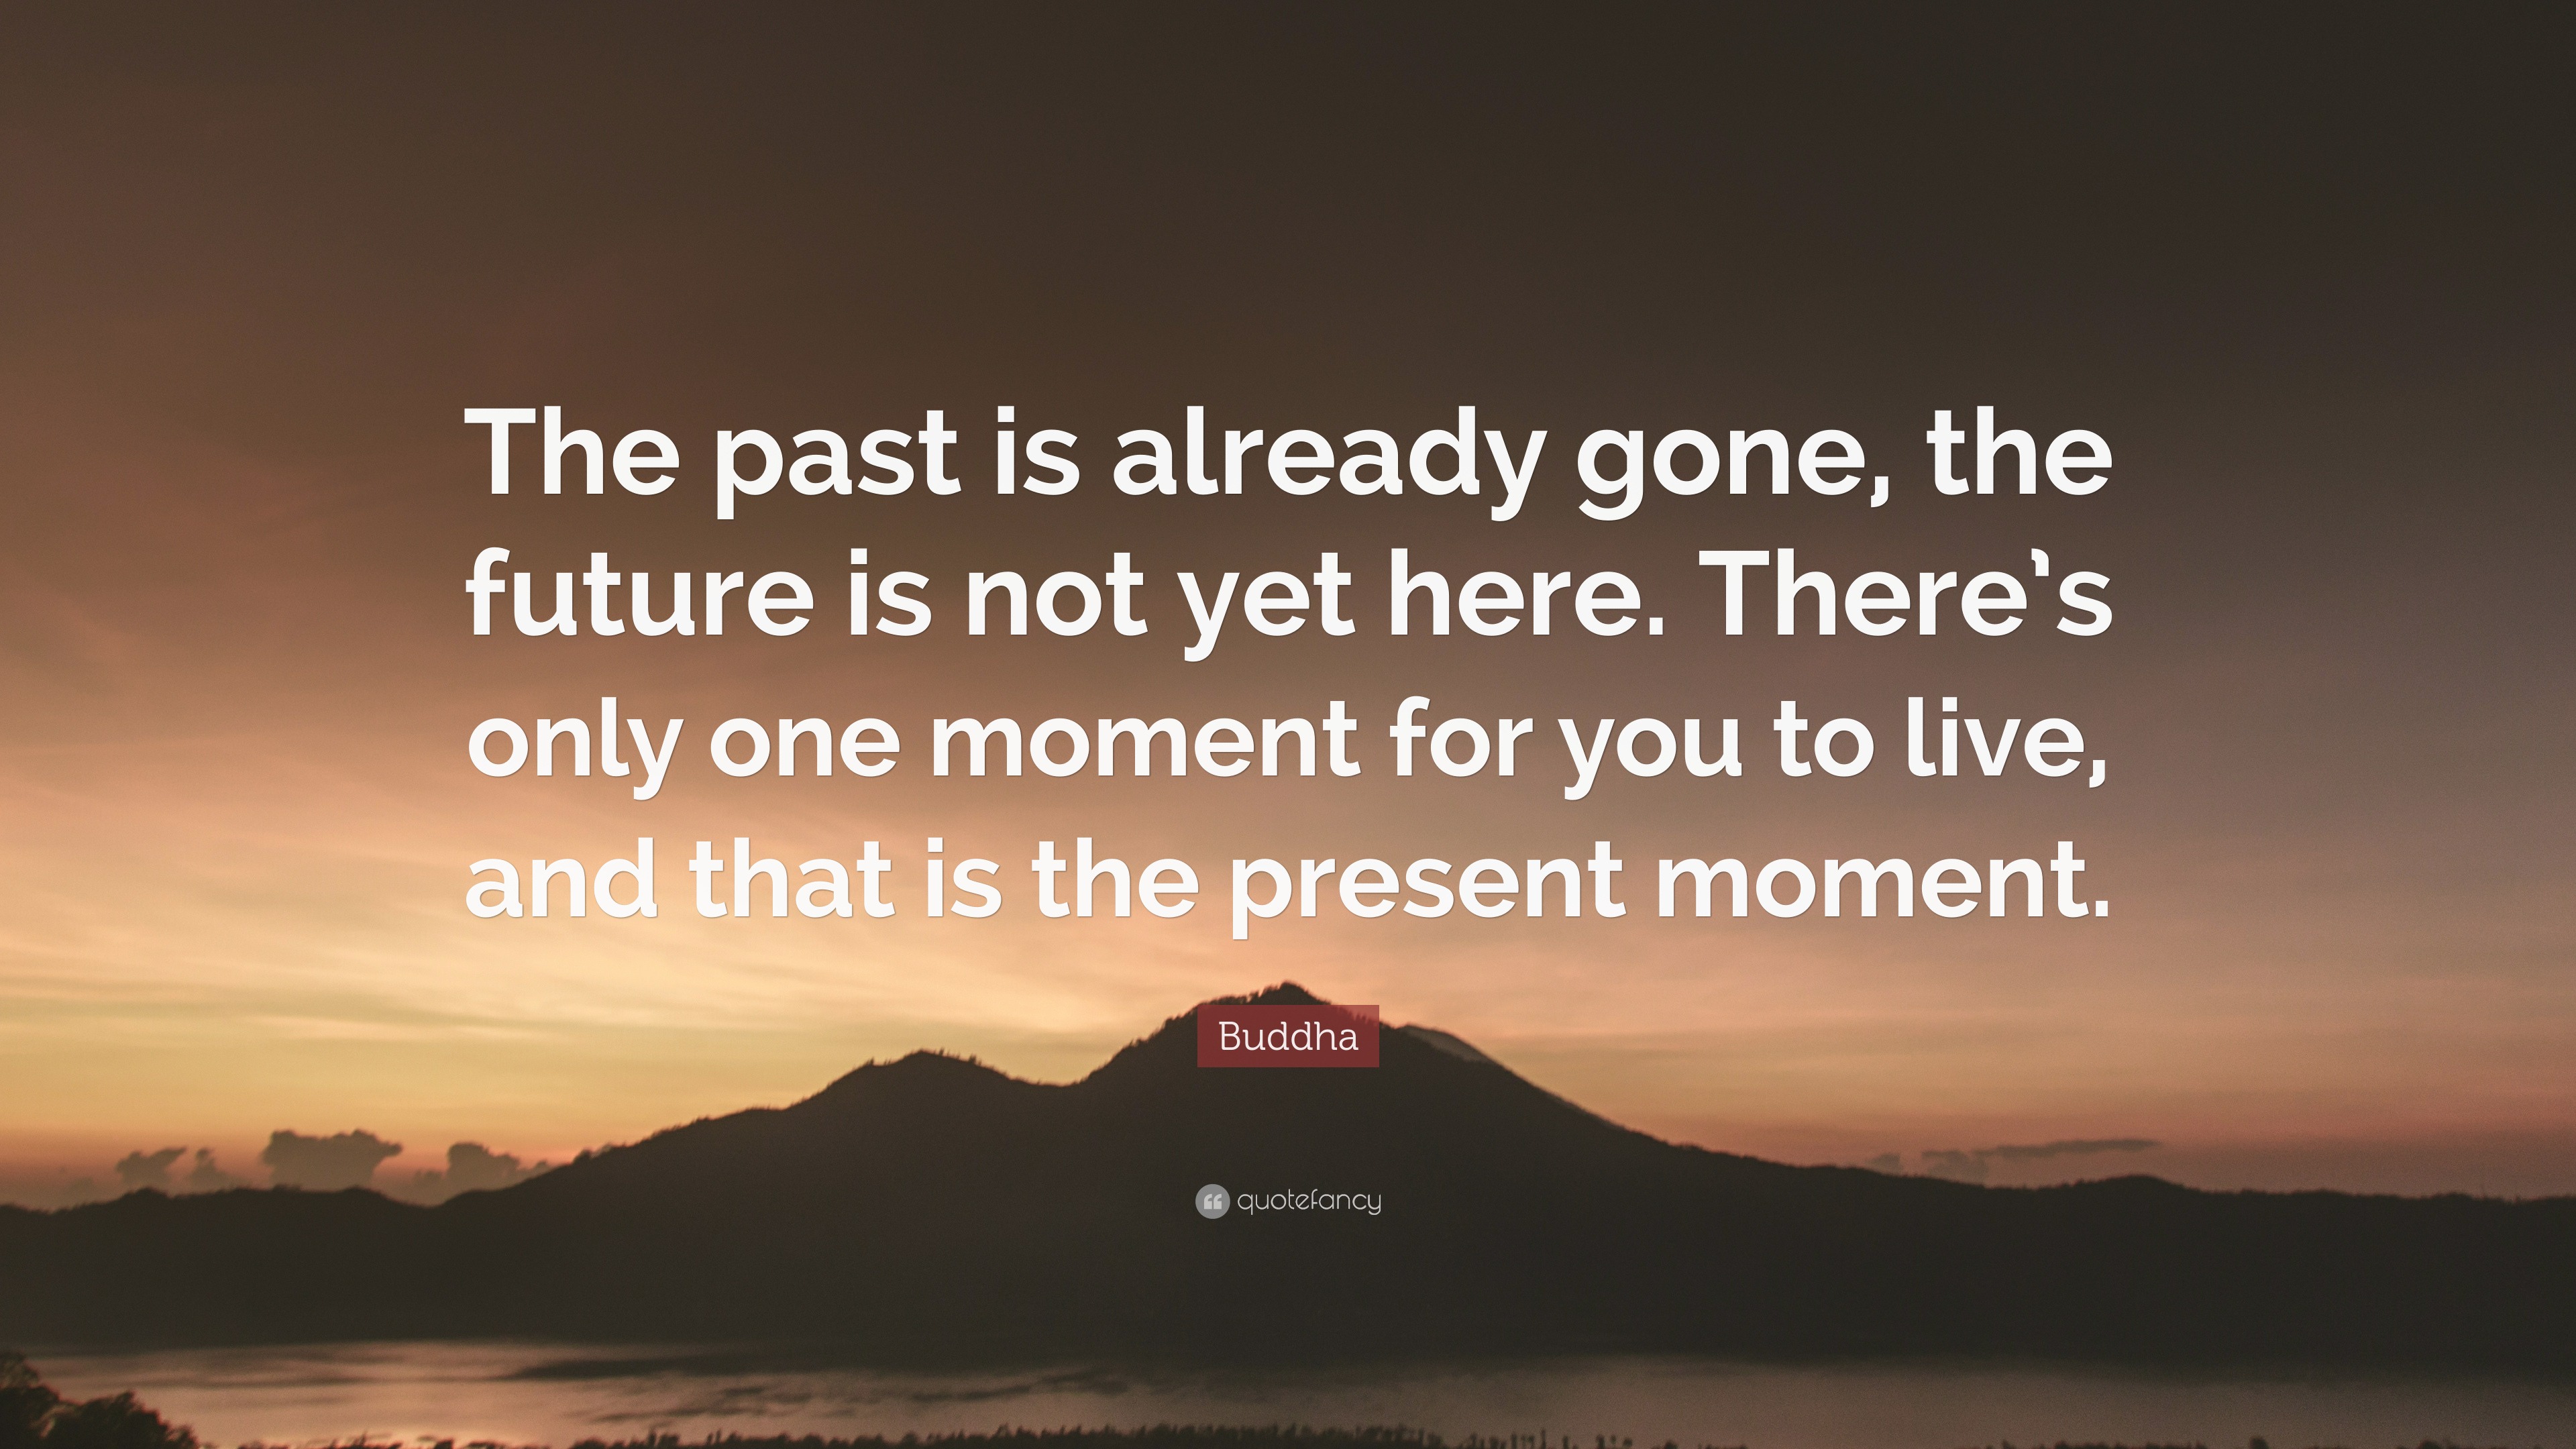 Buddha Quote: “The past is already gone, the future is not yet here